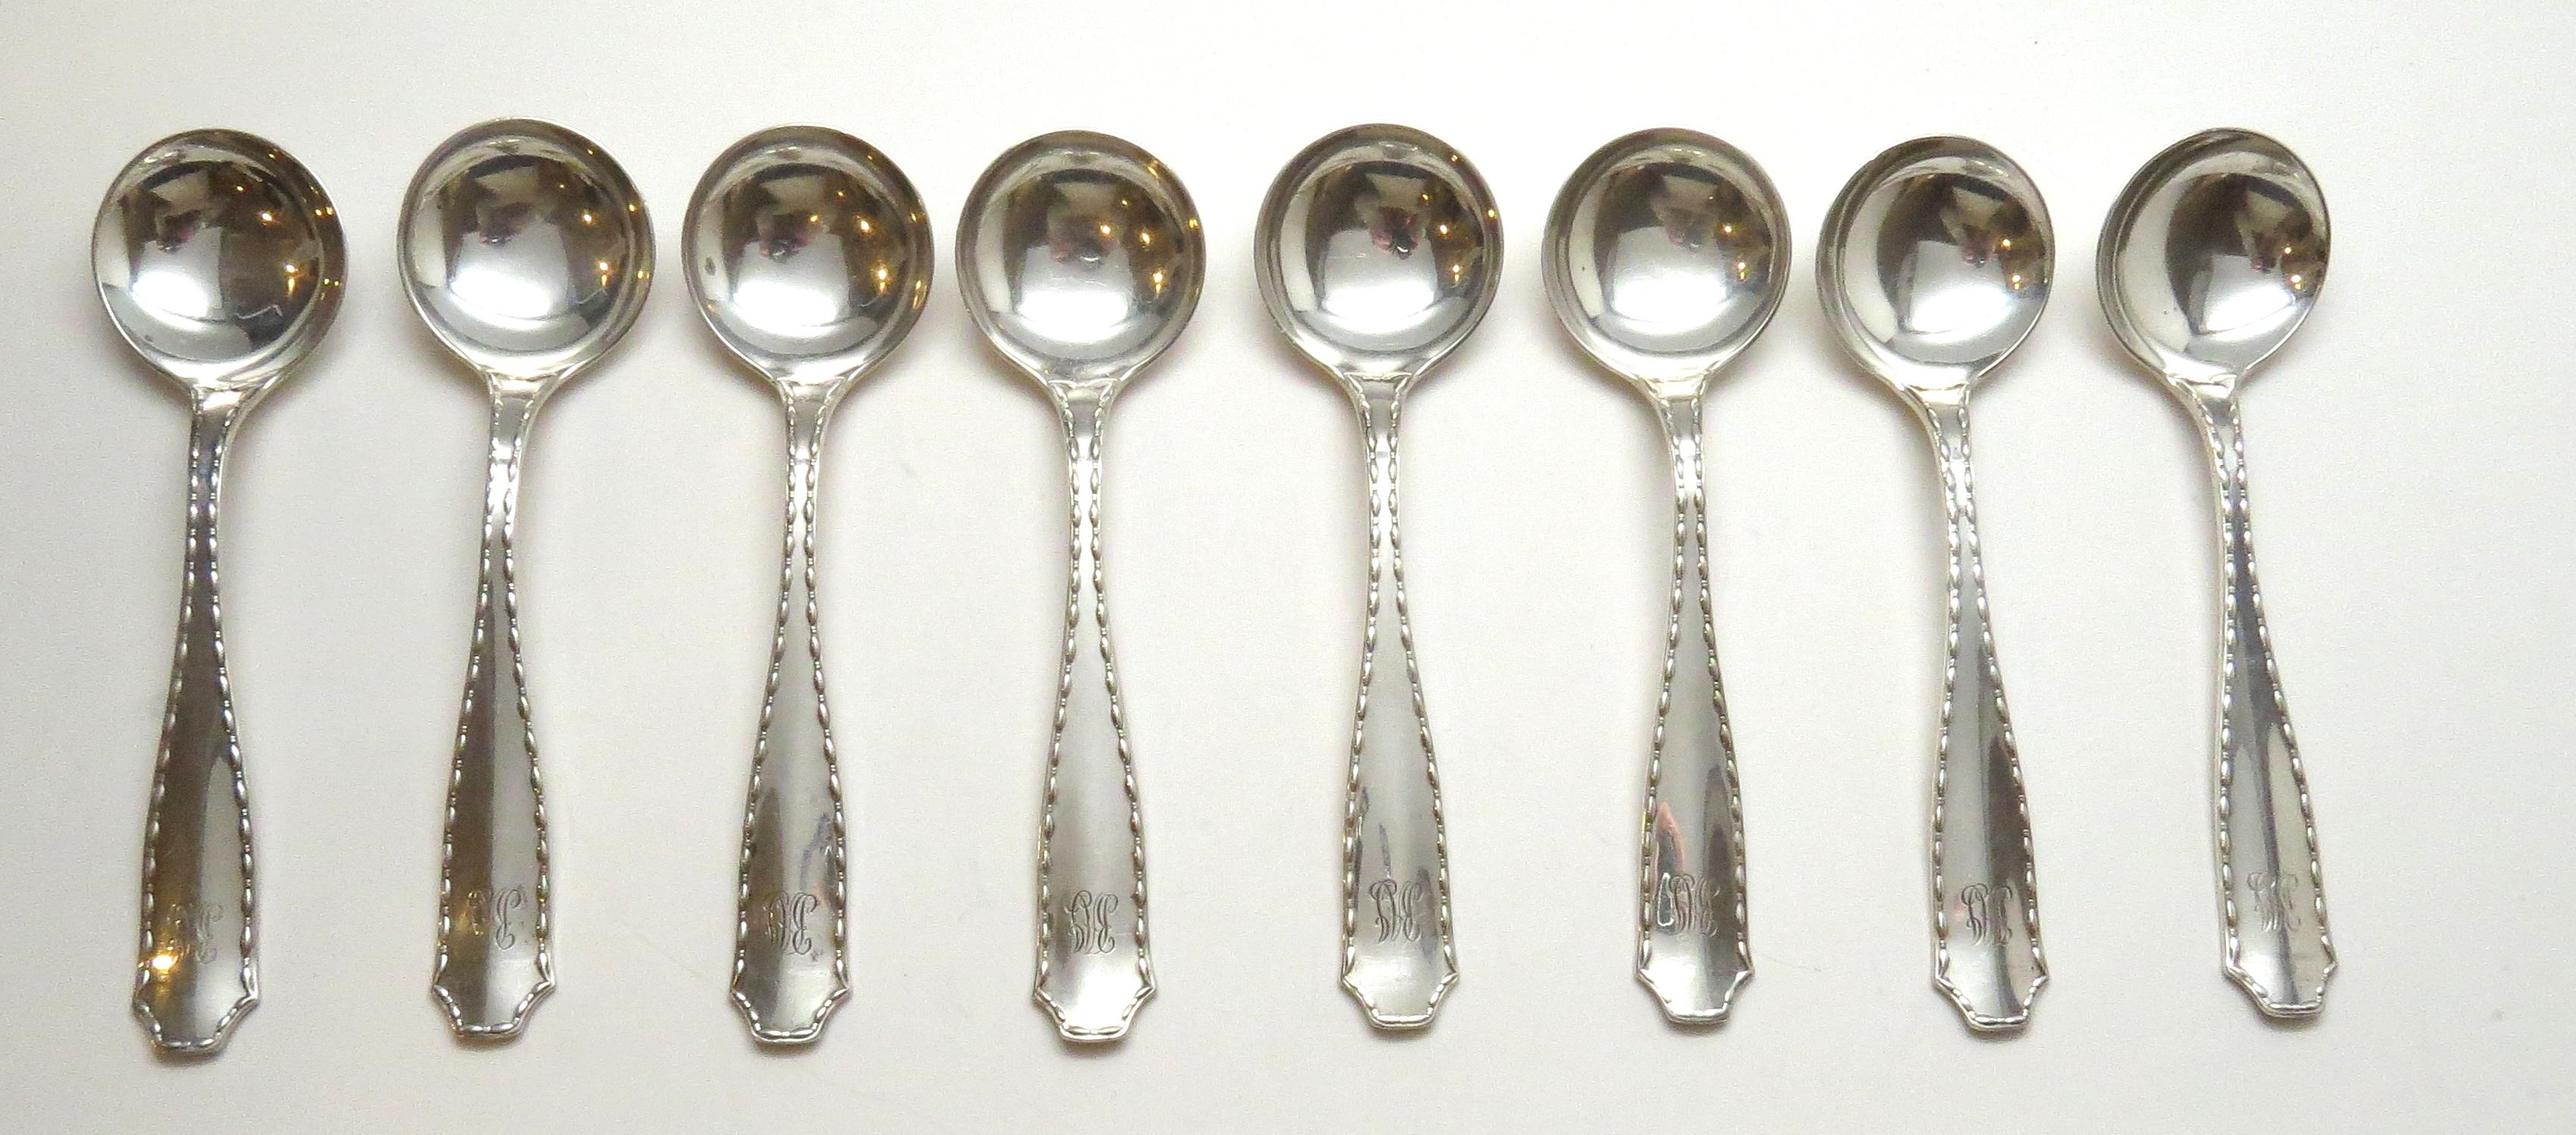 Eight TIFFANY & CO. Sterling silver large chocolate spoons in the 1902 Marquis pattern. 
Monogrammed: Raj. Marked: TIFFANY & CO. STERLING PAT. 1902.
 Measures: 5 1/4